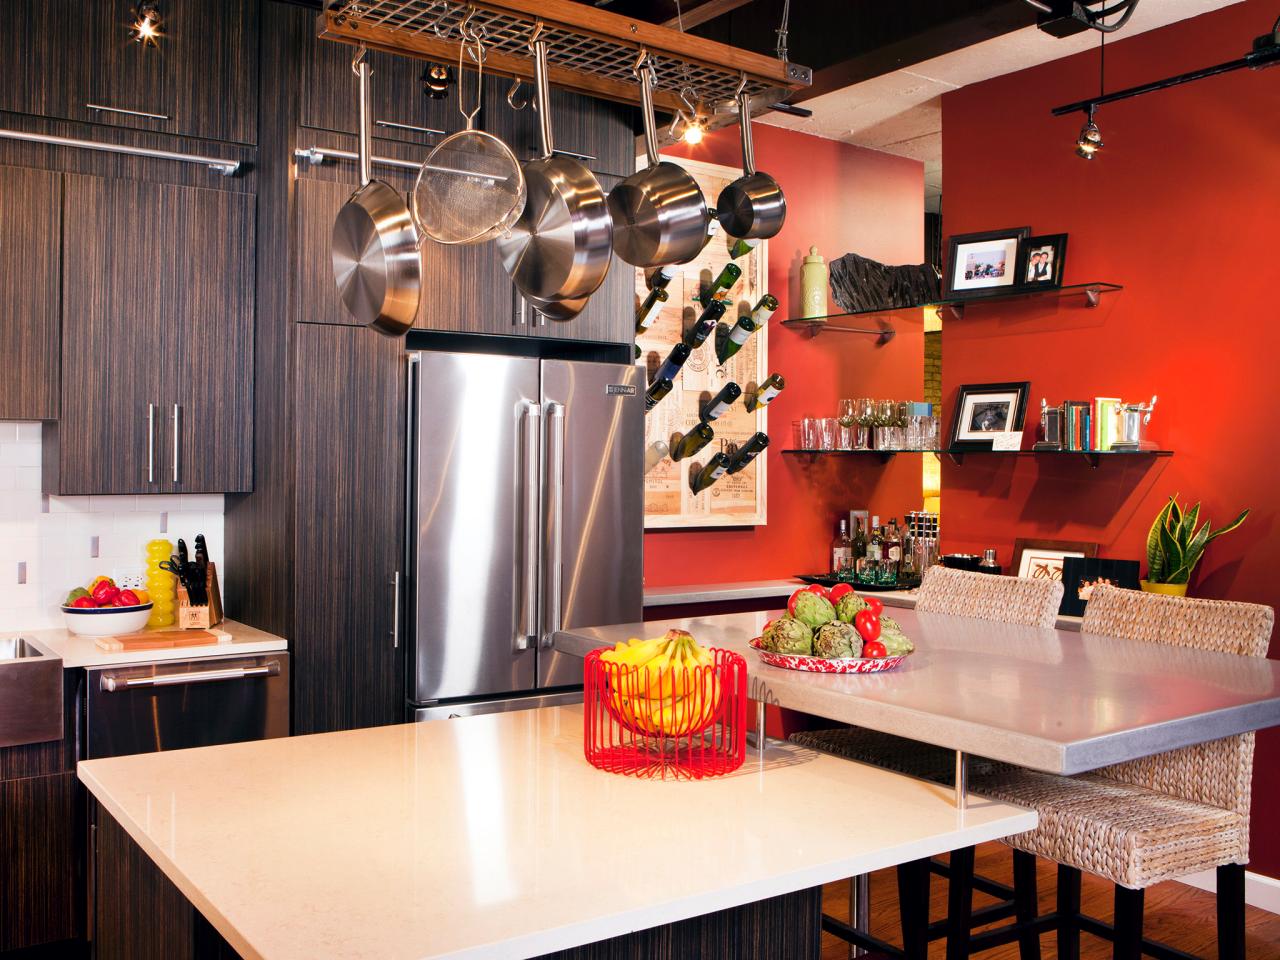 Eclectic Kitchens   HGTV